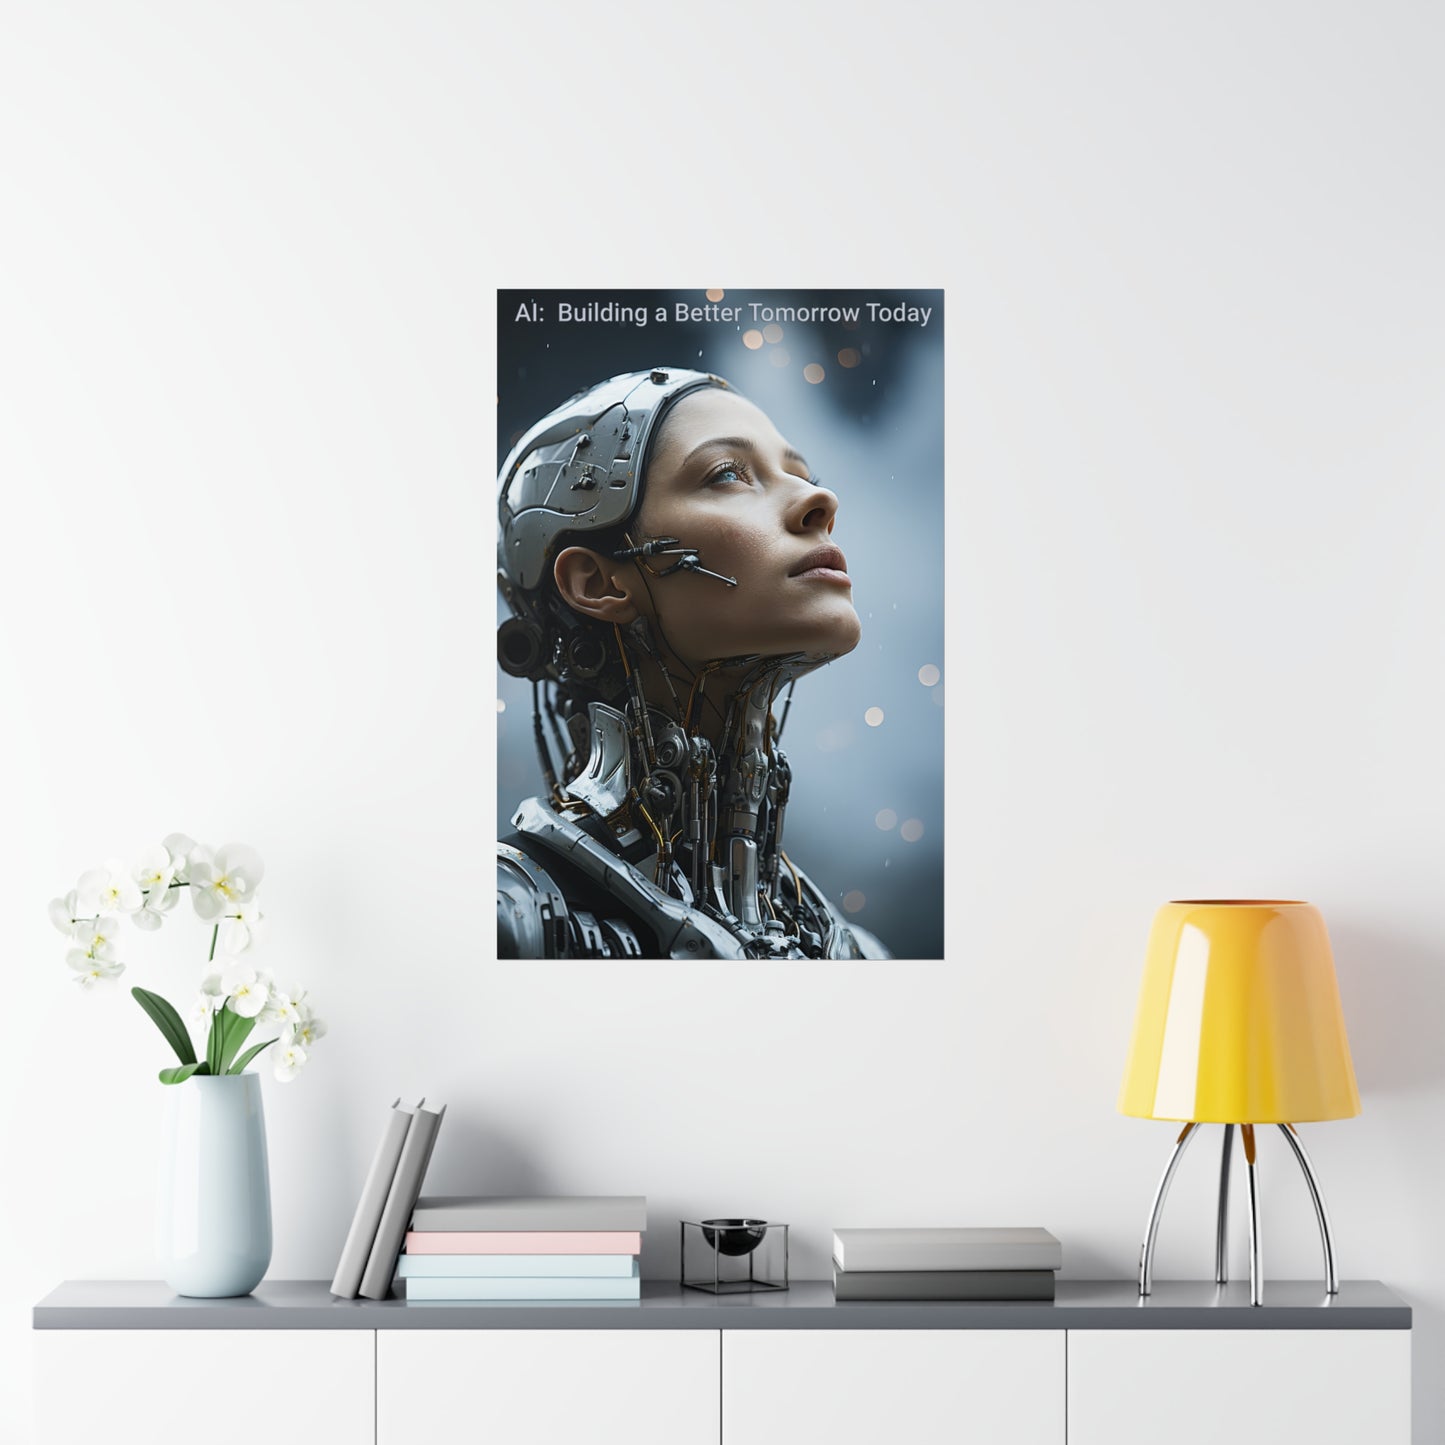 Premium Matte Vertical Poster. AI: Building a Better Tomorrow Today. AI Poster. Artificial Intelligence.